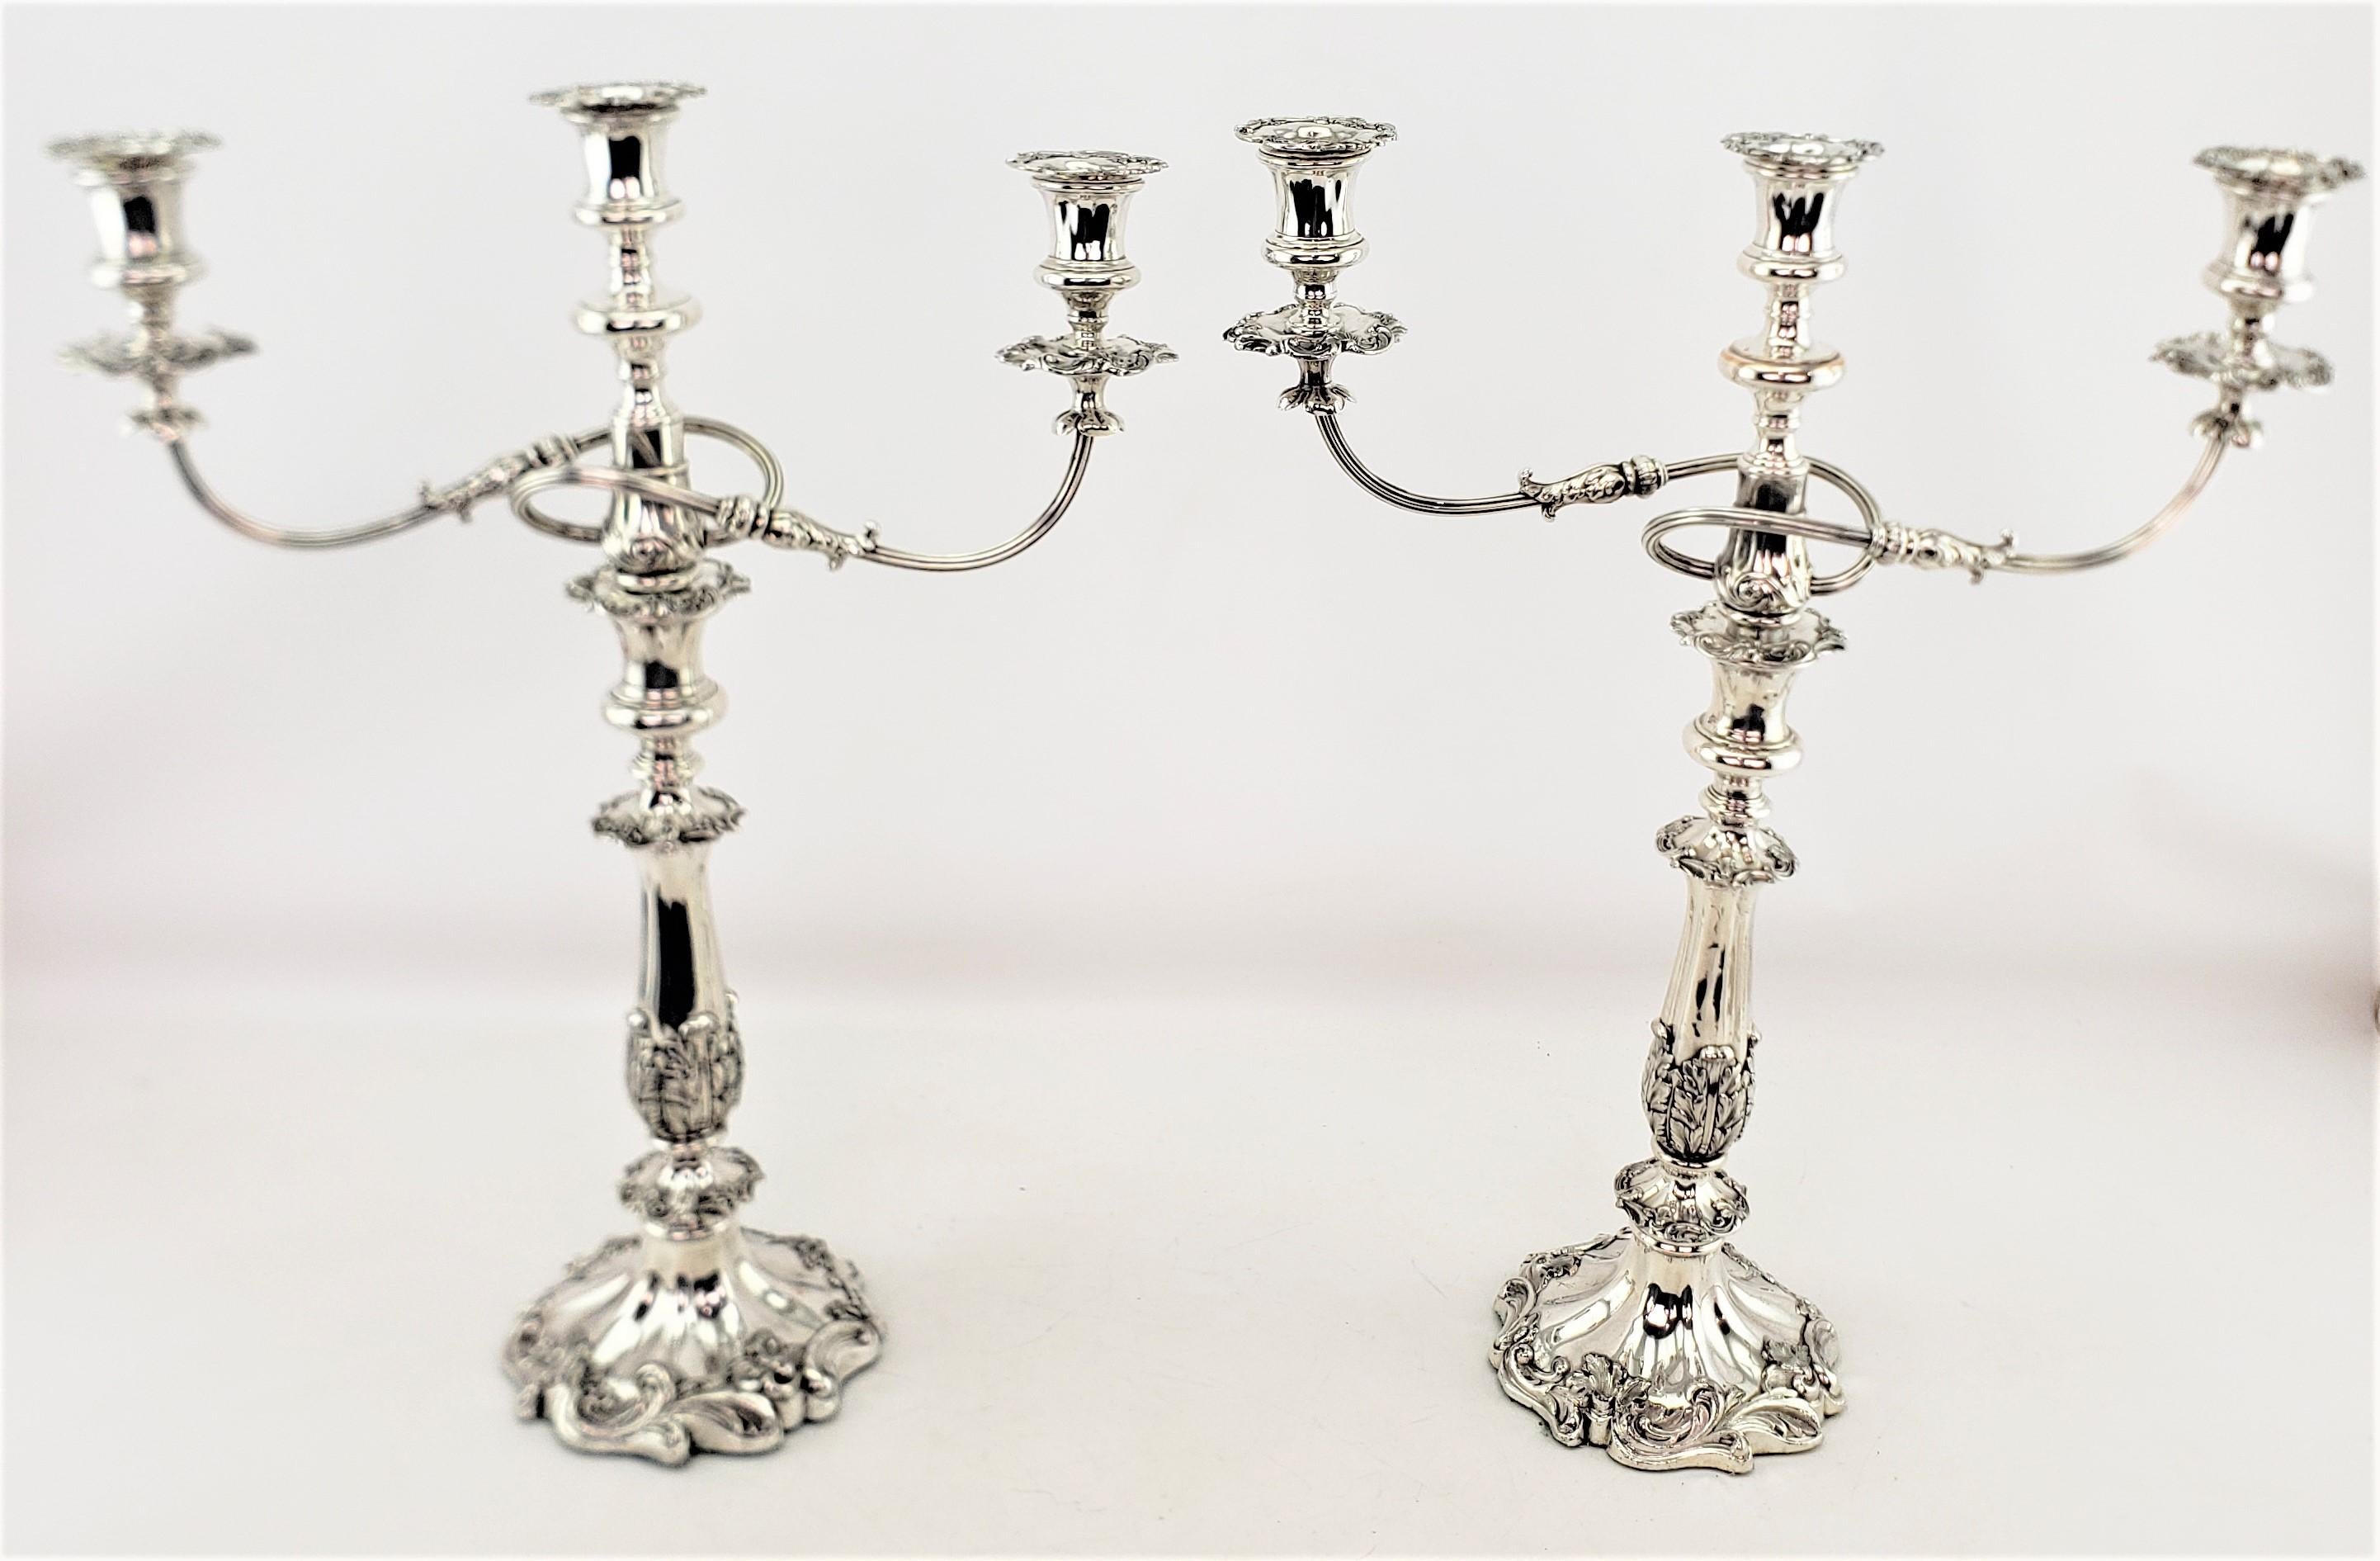 This pair of antique candelabras are unsigned, but presumed to have originated from England and date to approximately 1880 and done in the period Victorian style. These candelabras are composed of silver plate with a three cup insert, which can be